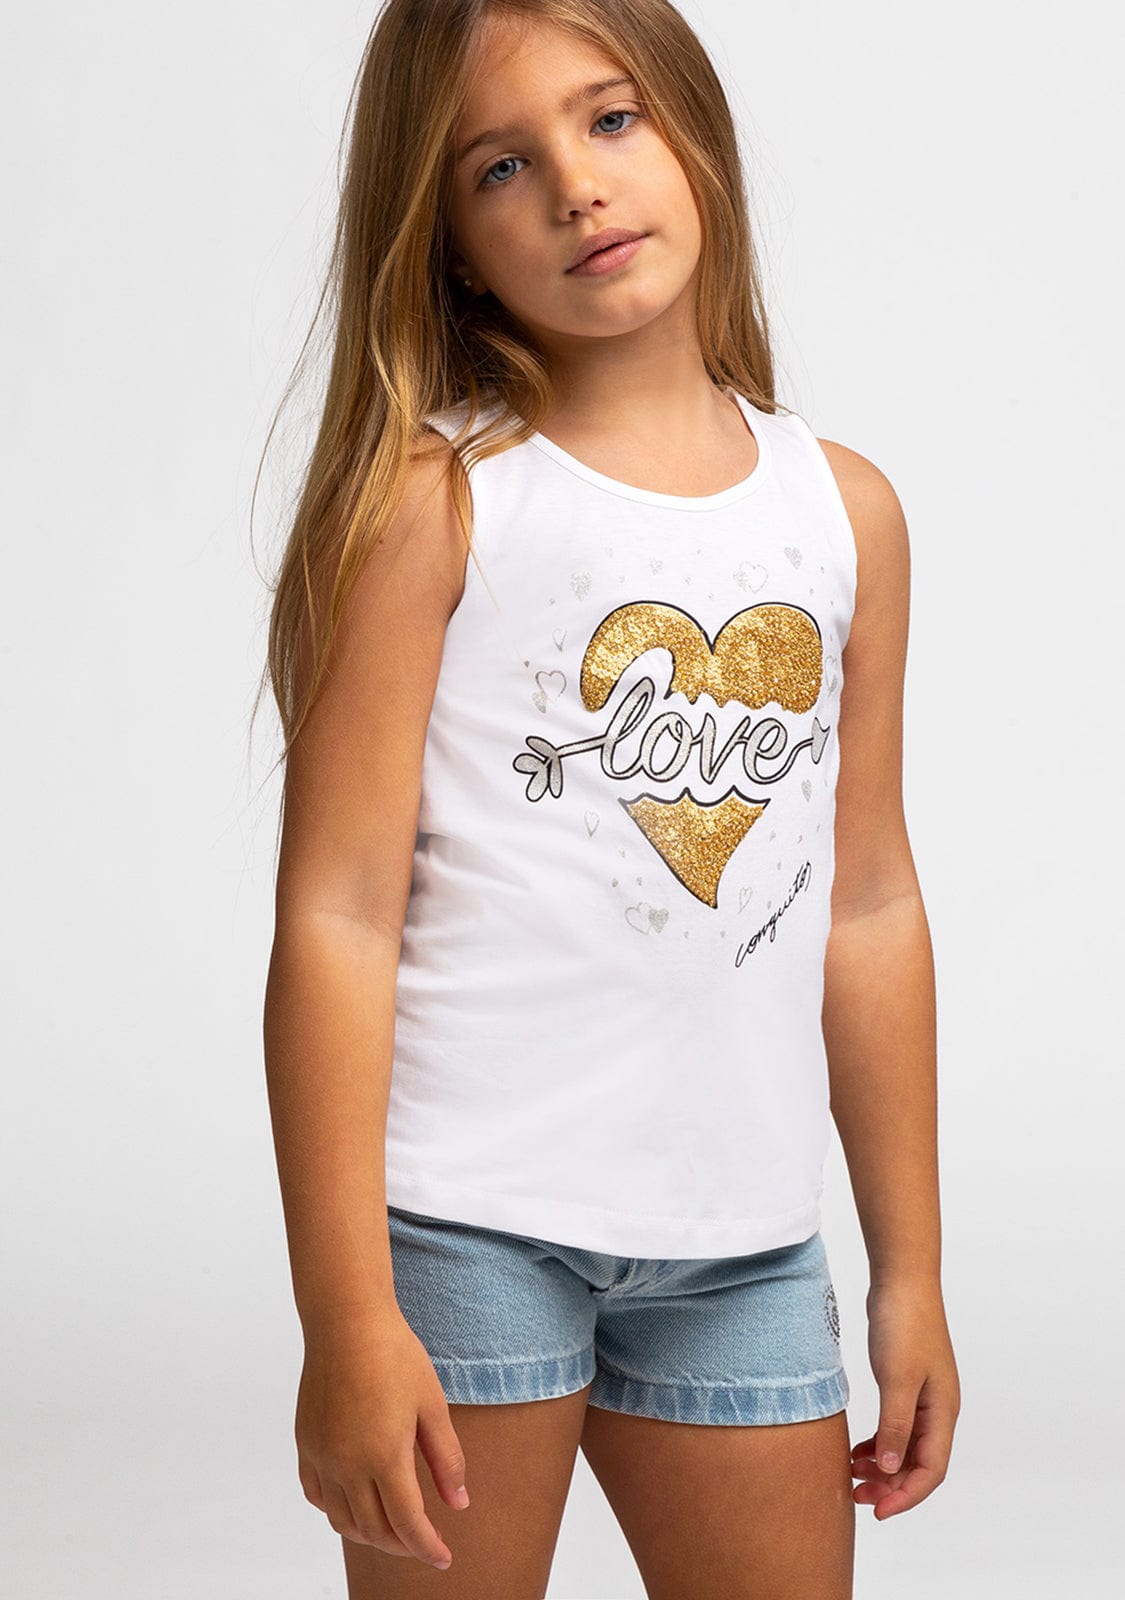 CONGUITOS TEXTIL Clothing Girl's Gold Heart T-Shirt